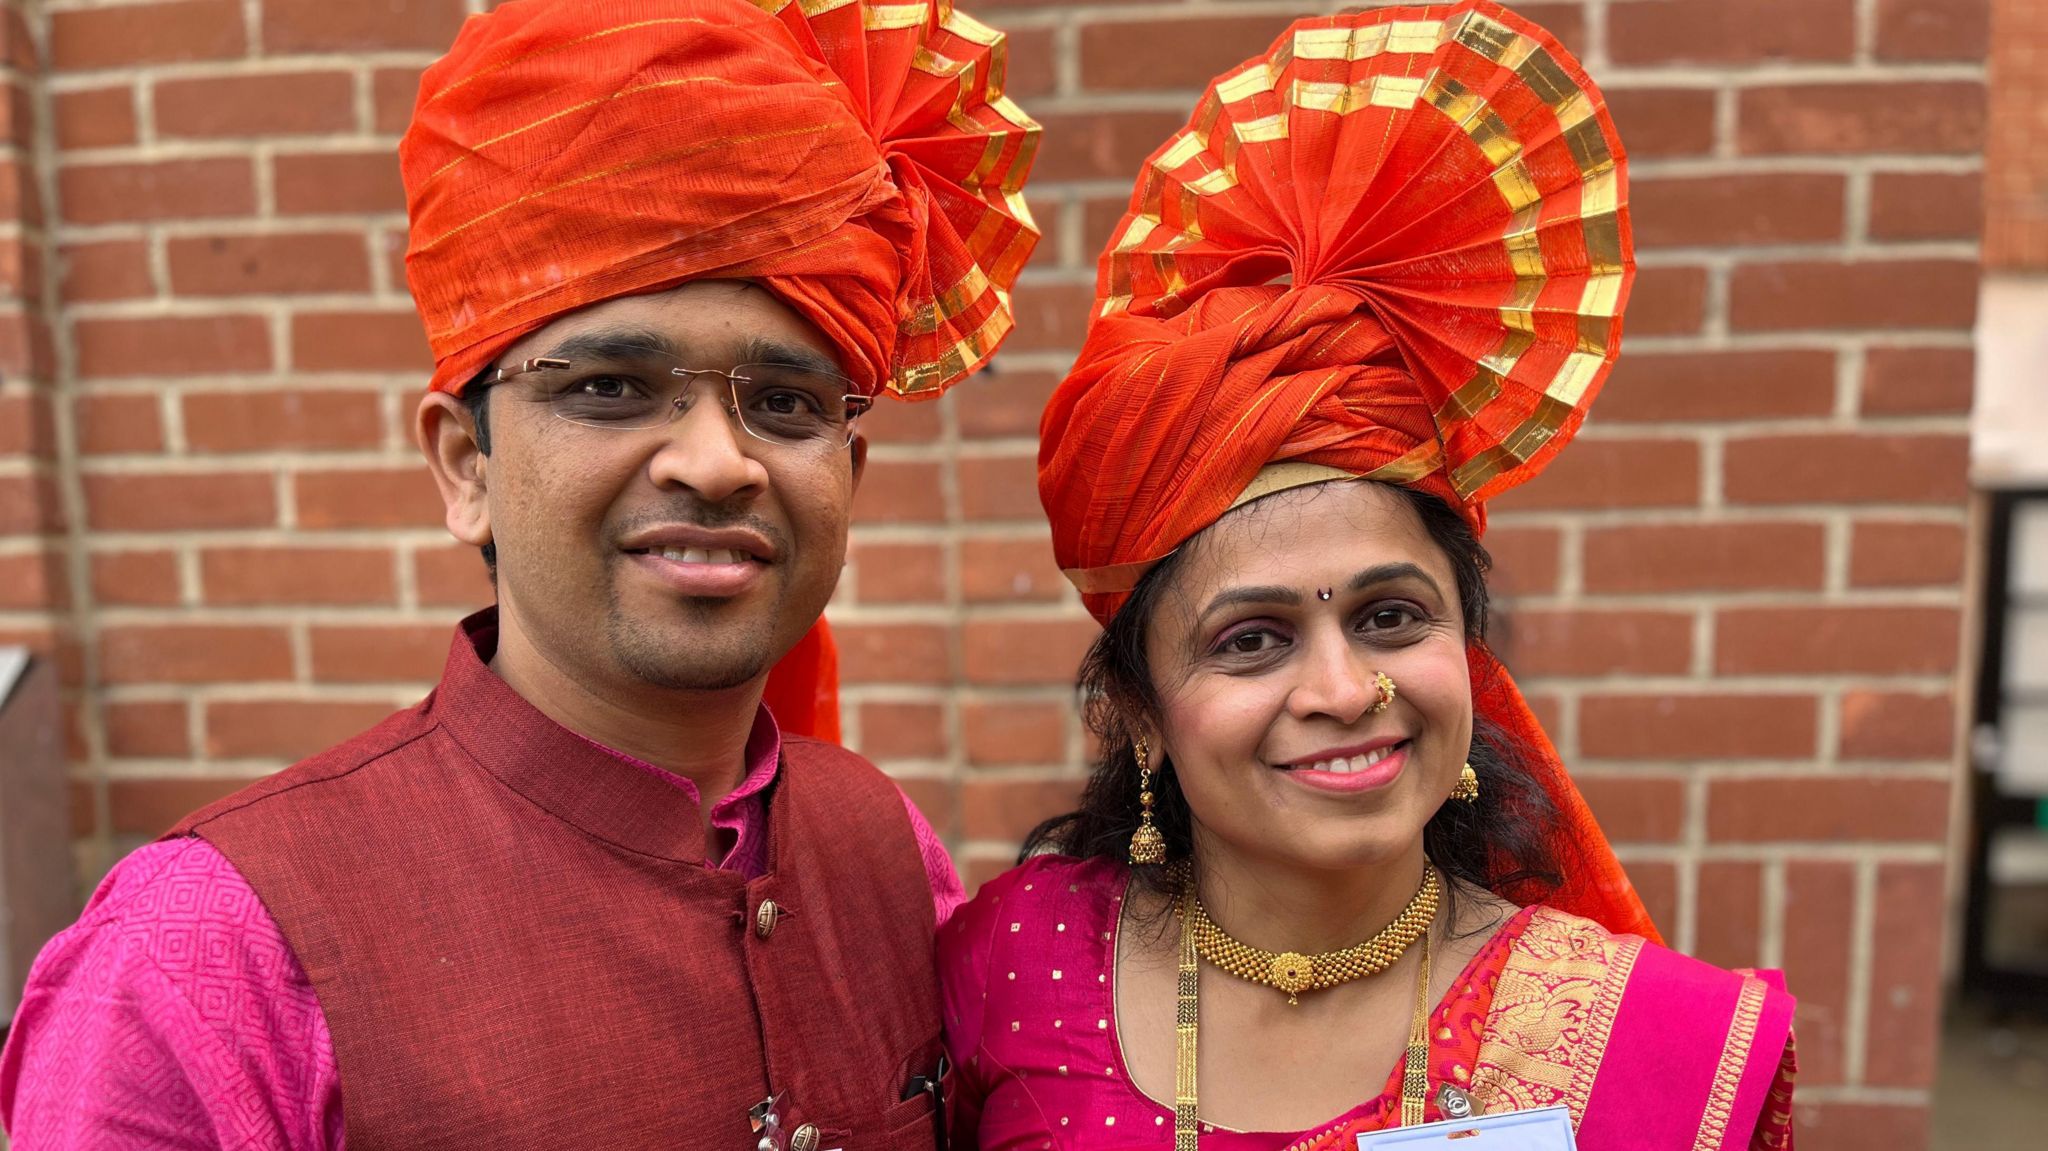 Yogesh and Snehal Ugale, a coupe of Indian heritage, wear orange headdresses